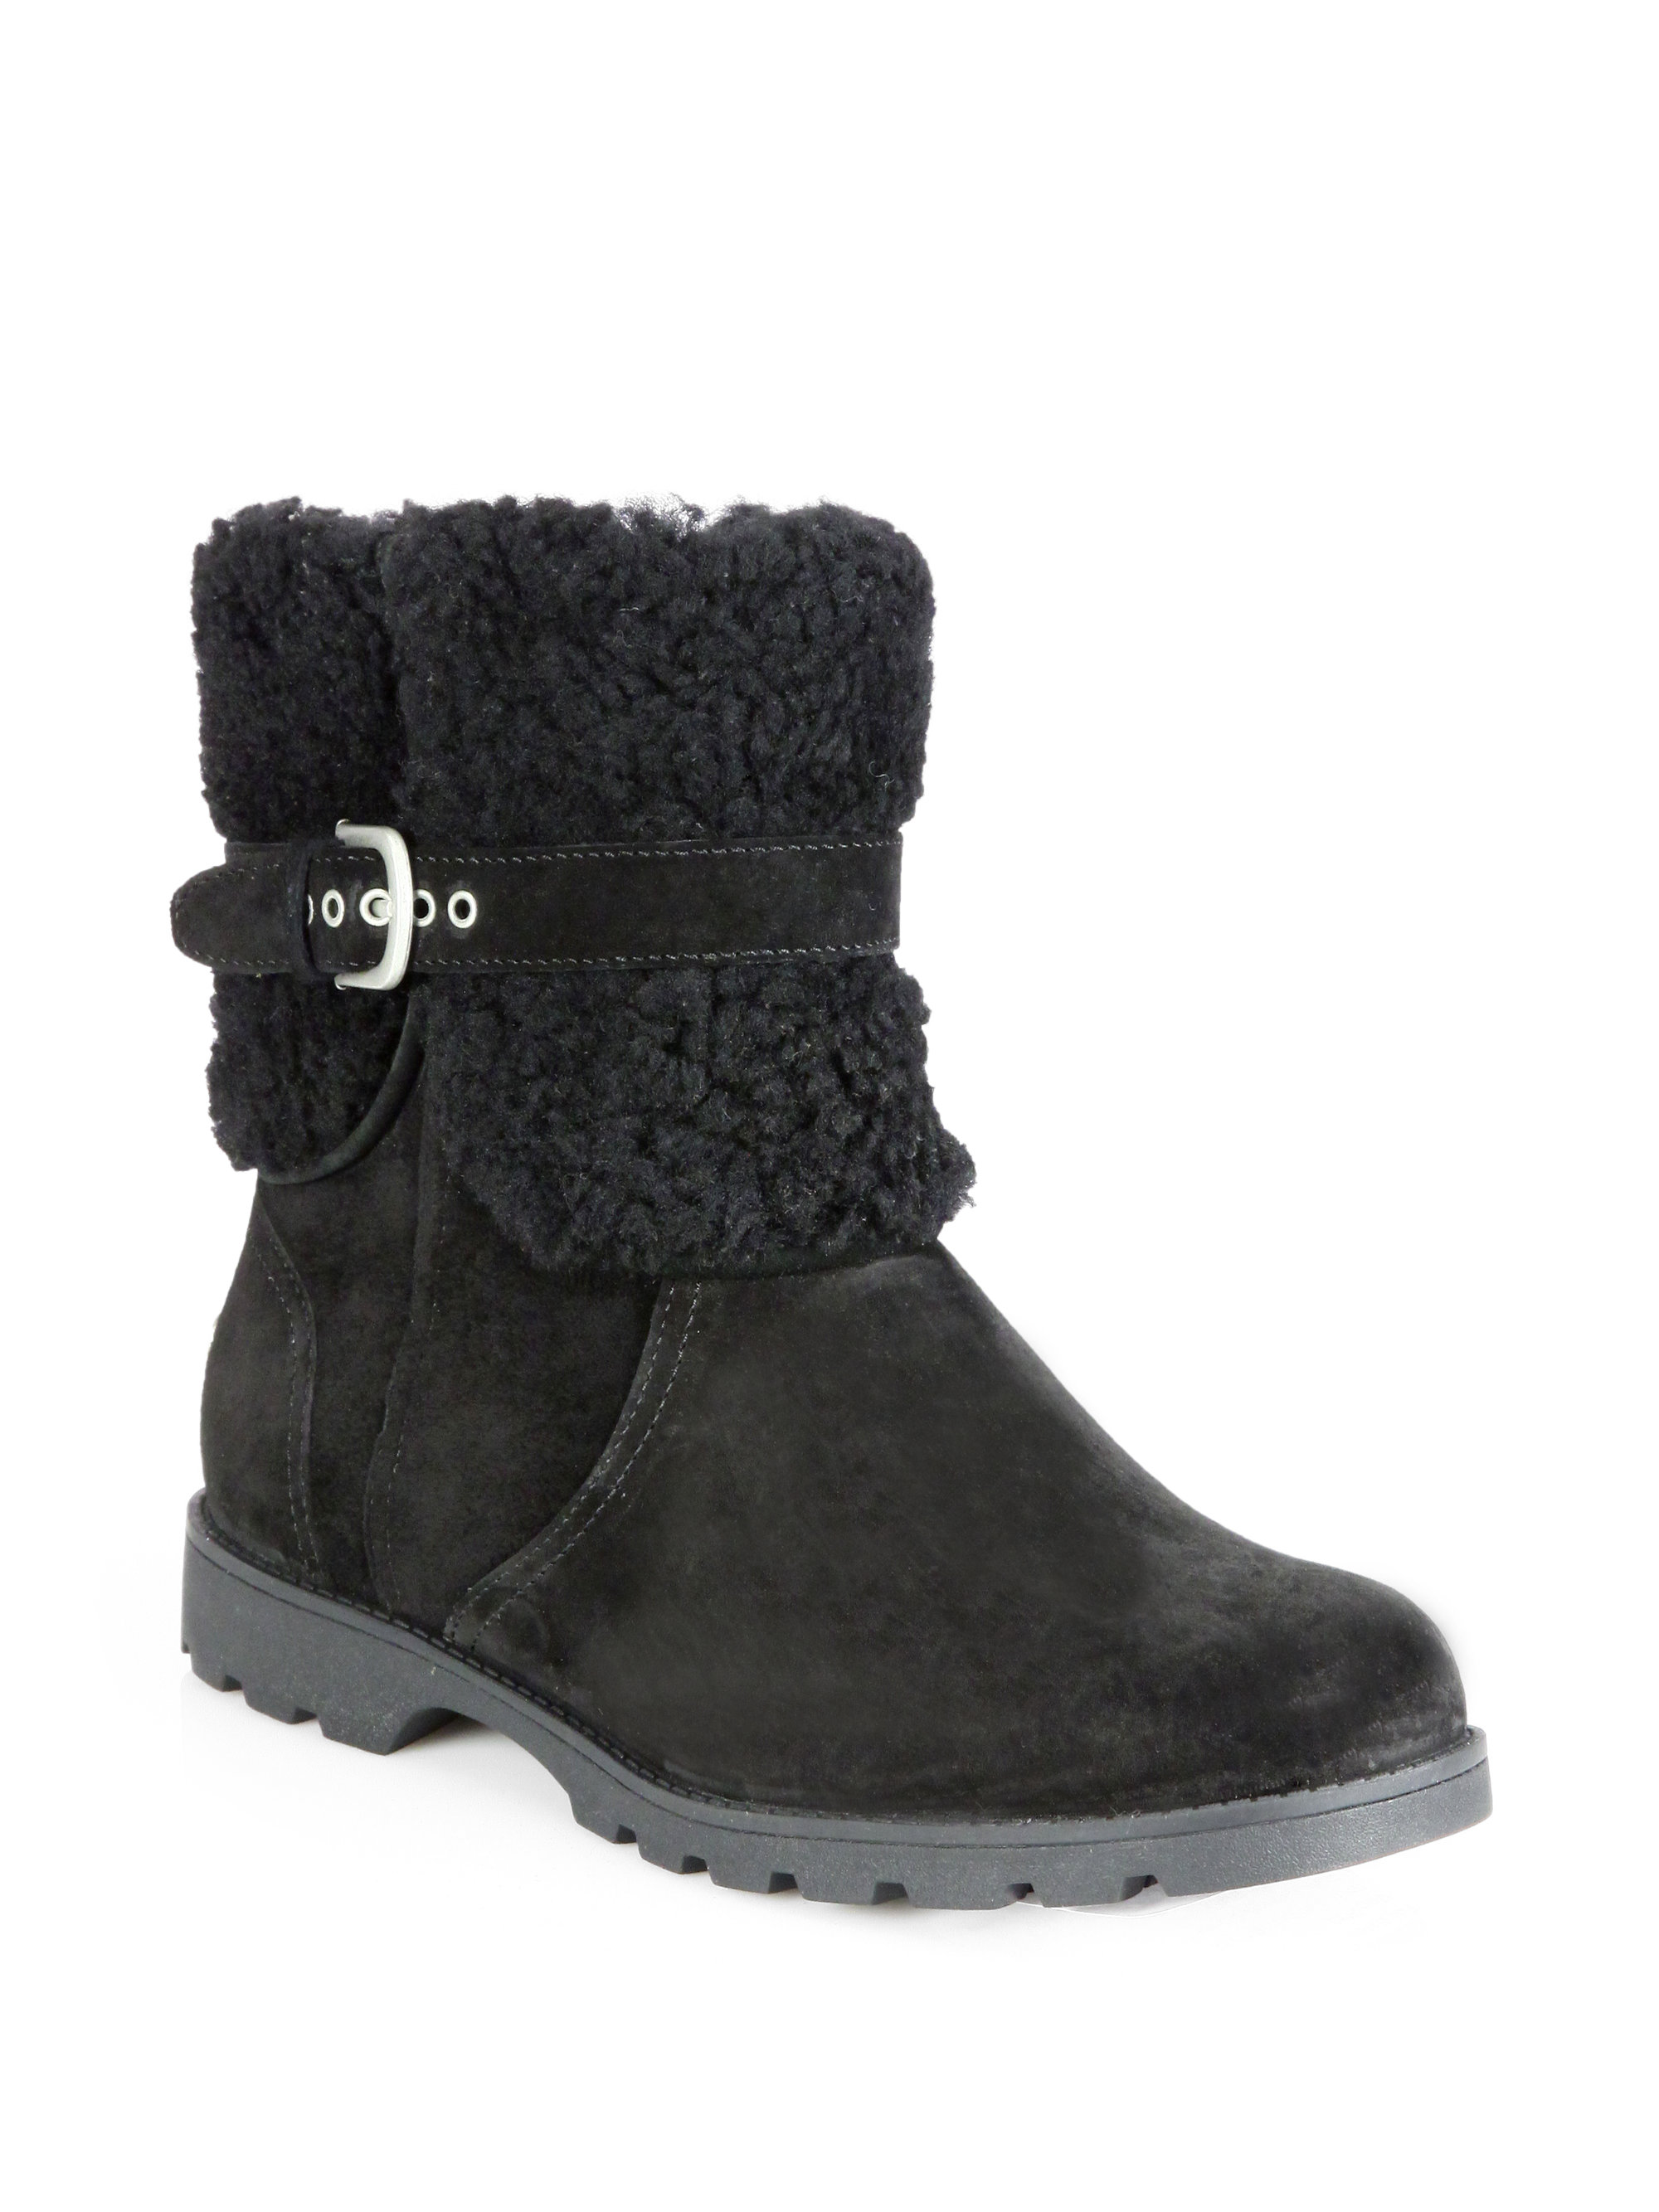 Ugg Blayre Shearling-Trimmed Suede Boots in Black | Lyst